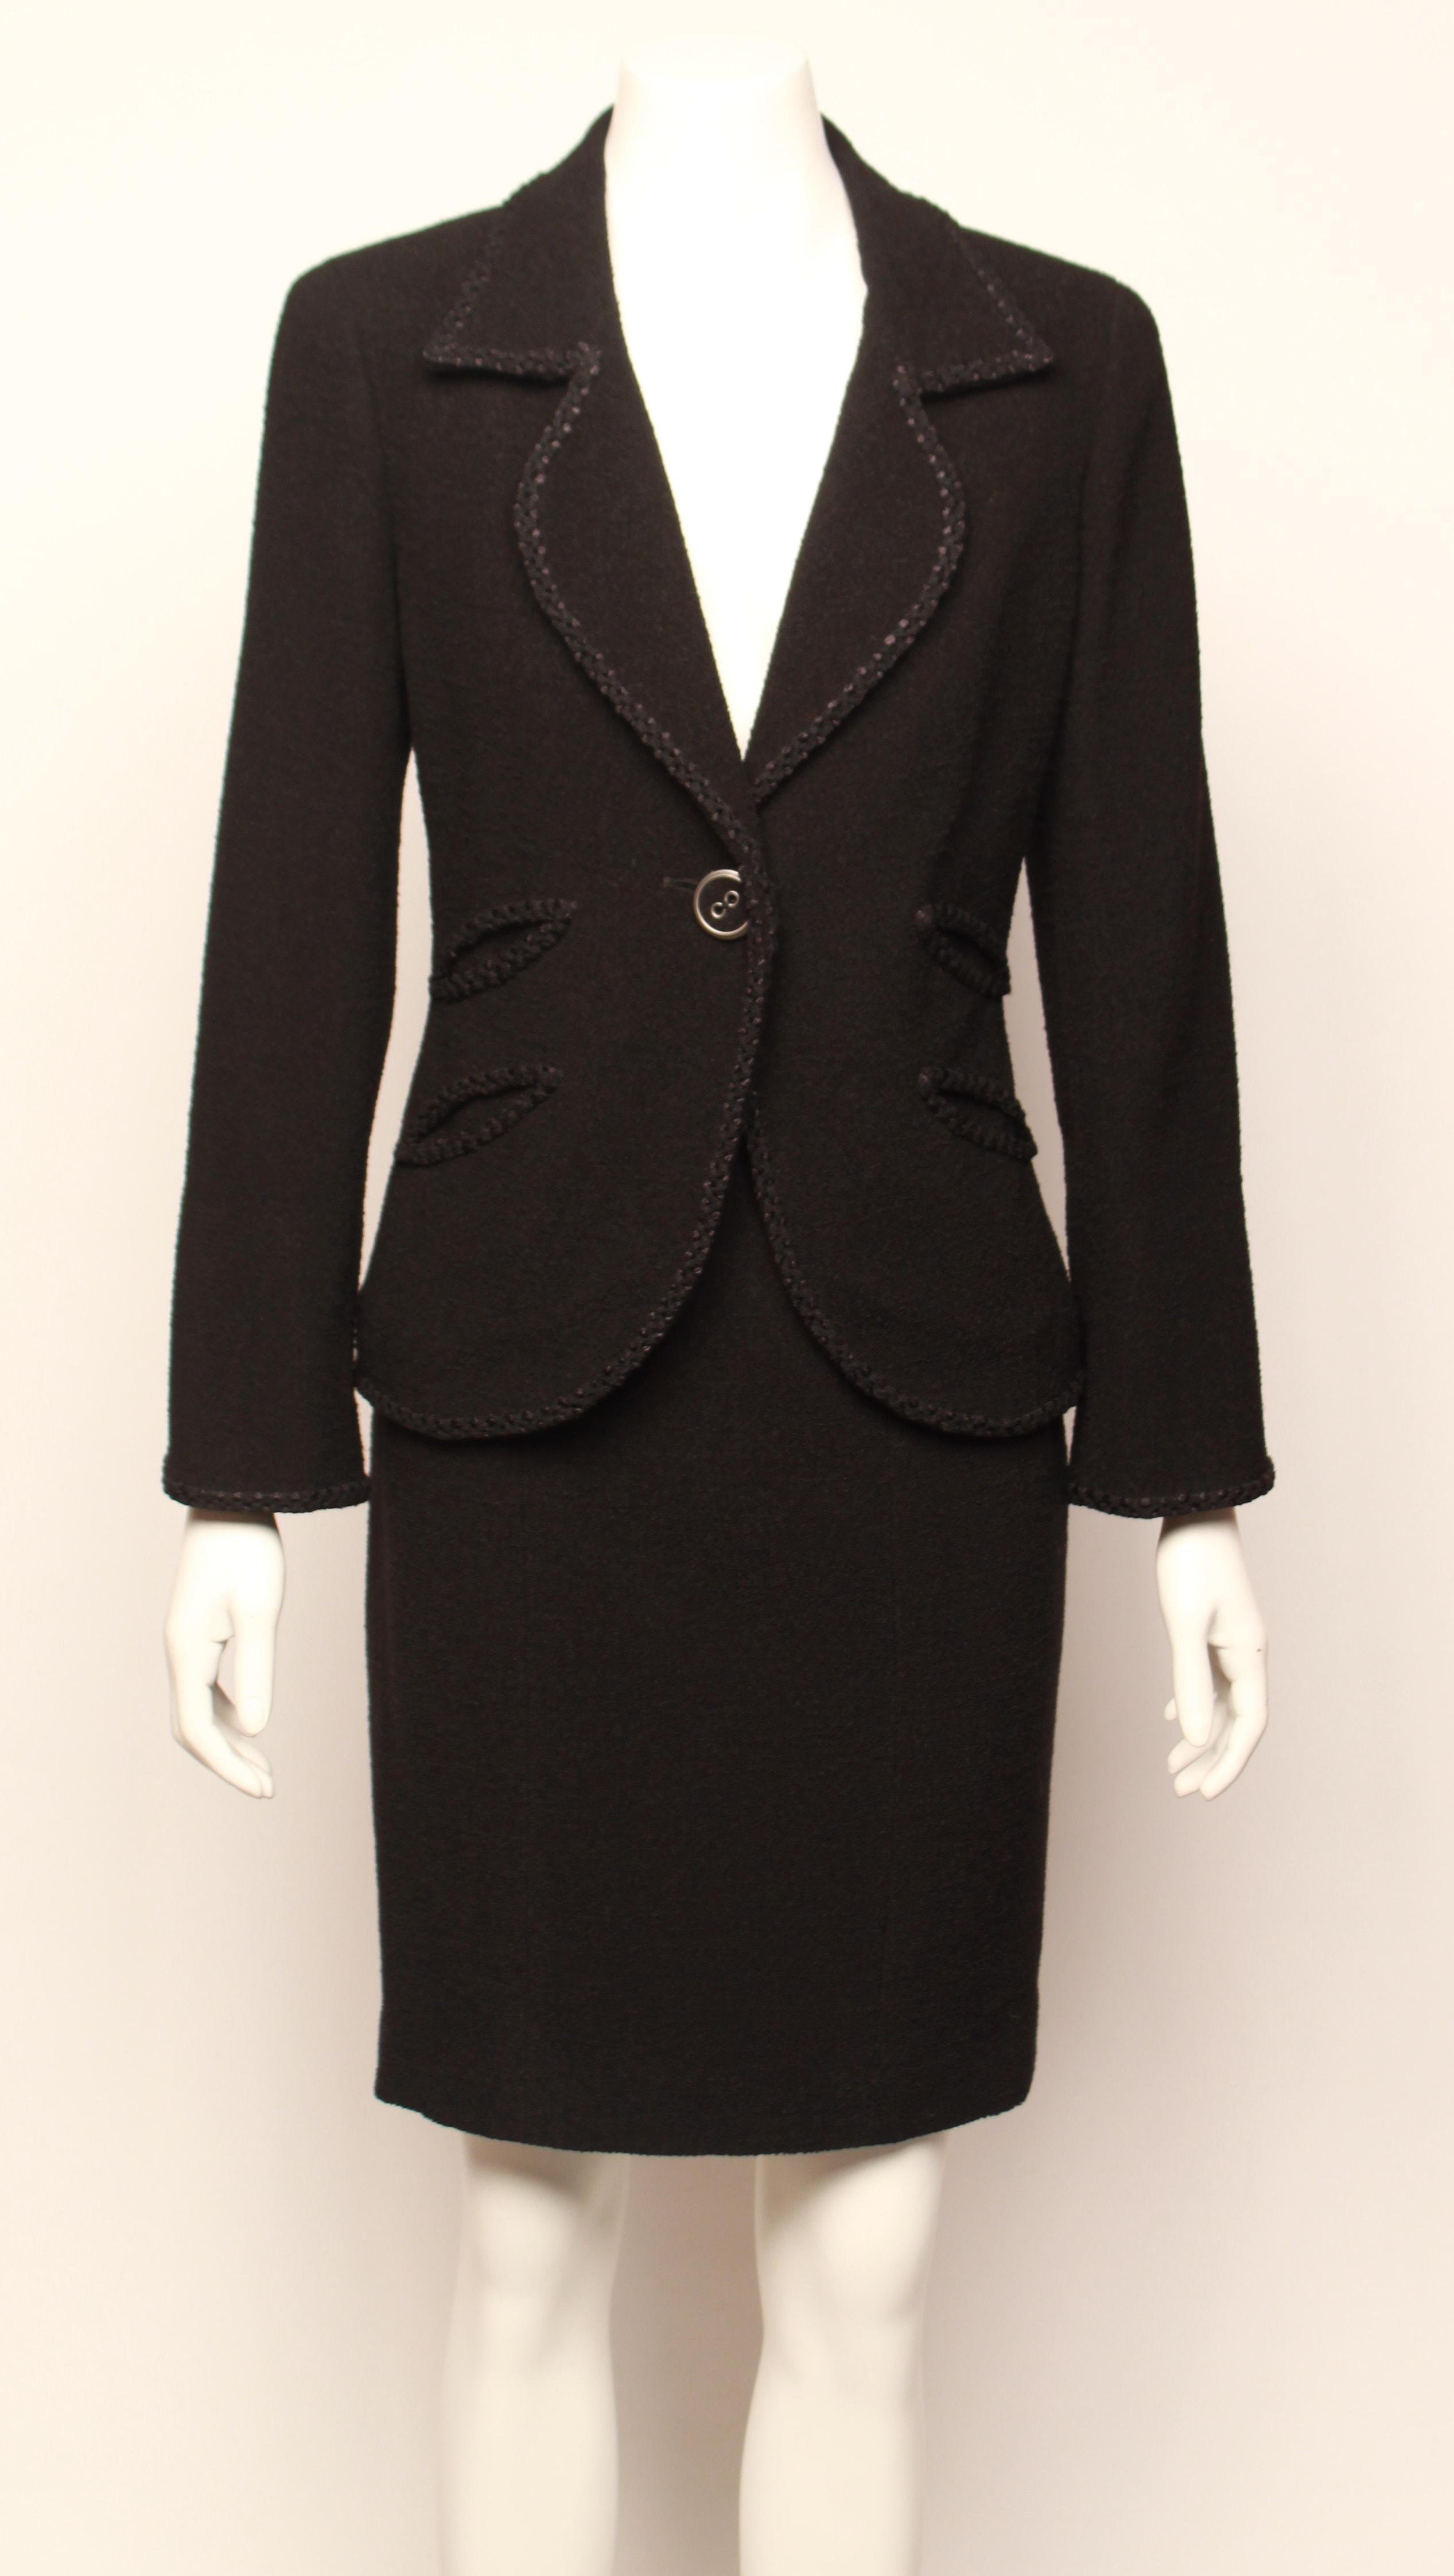 Classic and elegant CHANEL boucle' skirt suit ensemble features single breasted jacket with petal shaped collar, braid edging and decorative button closure. Fully lined in signature embossed silk lining. 
Knee length pencil skirt is panelled and